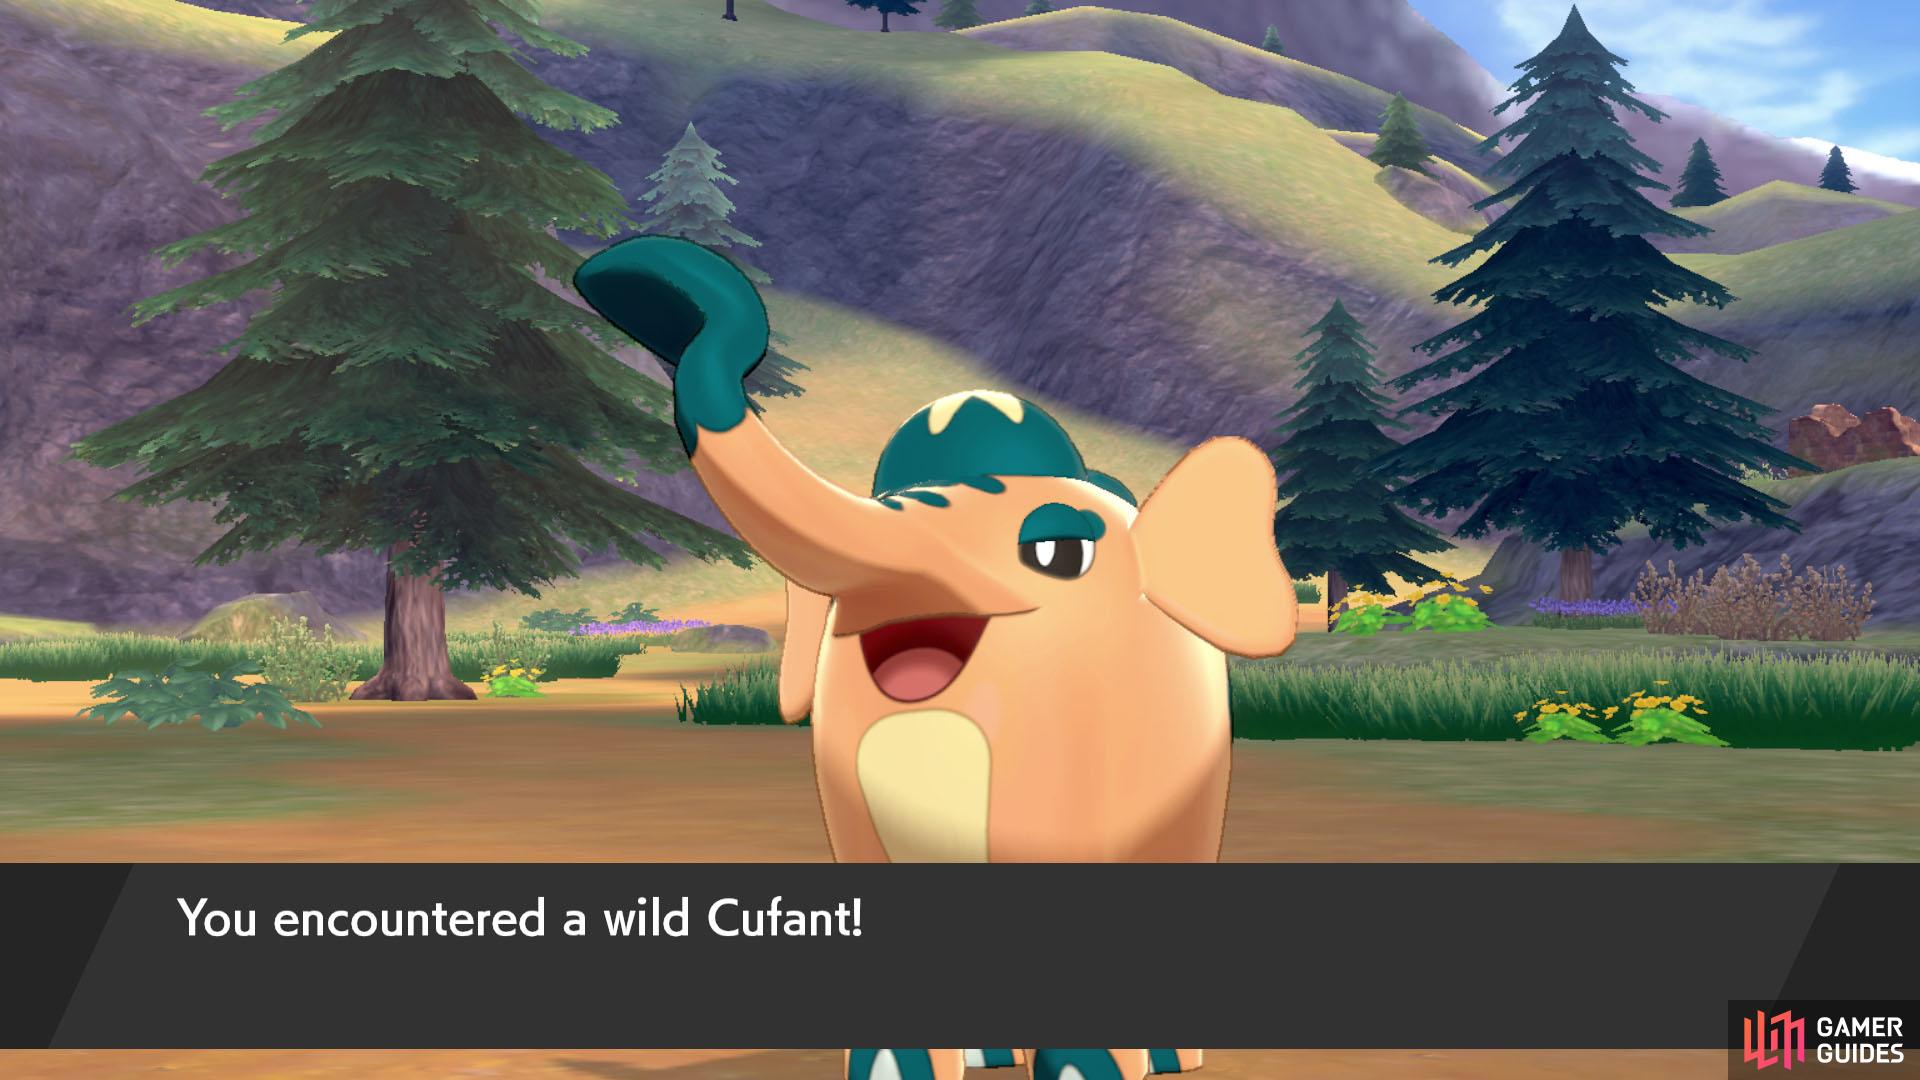 If you couldn’t find Cufant in the base game, they’re relatively common here.